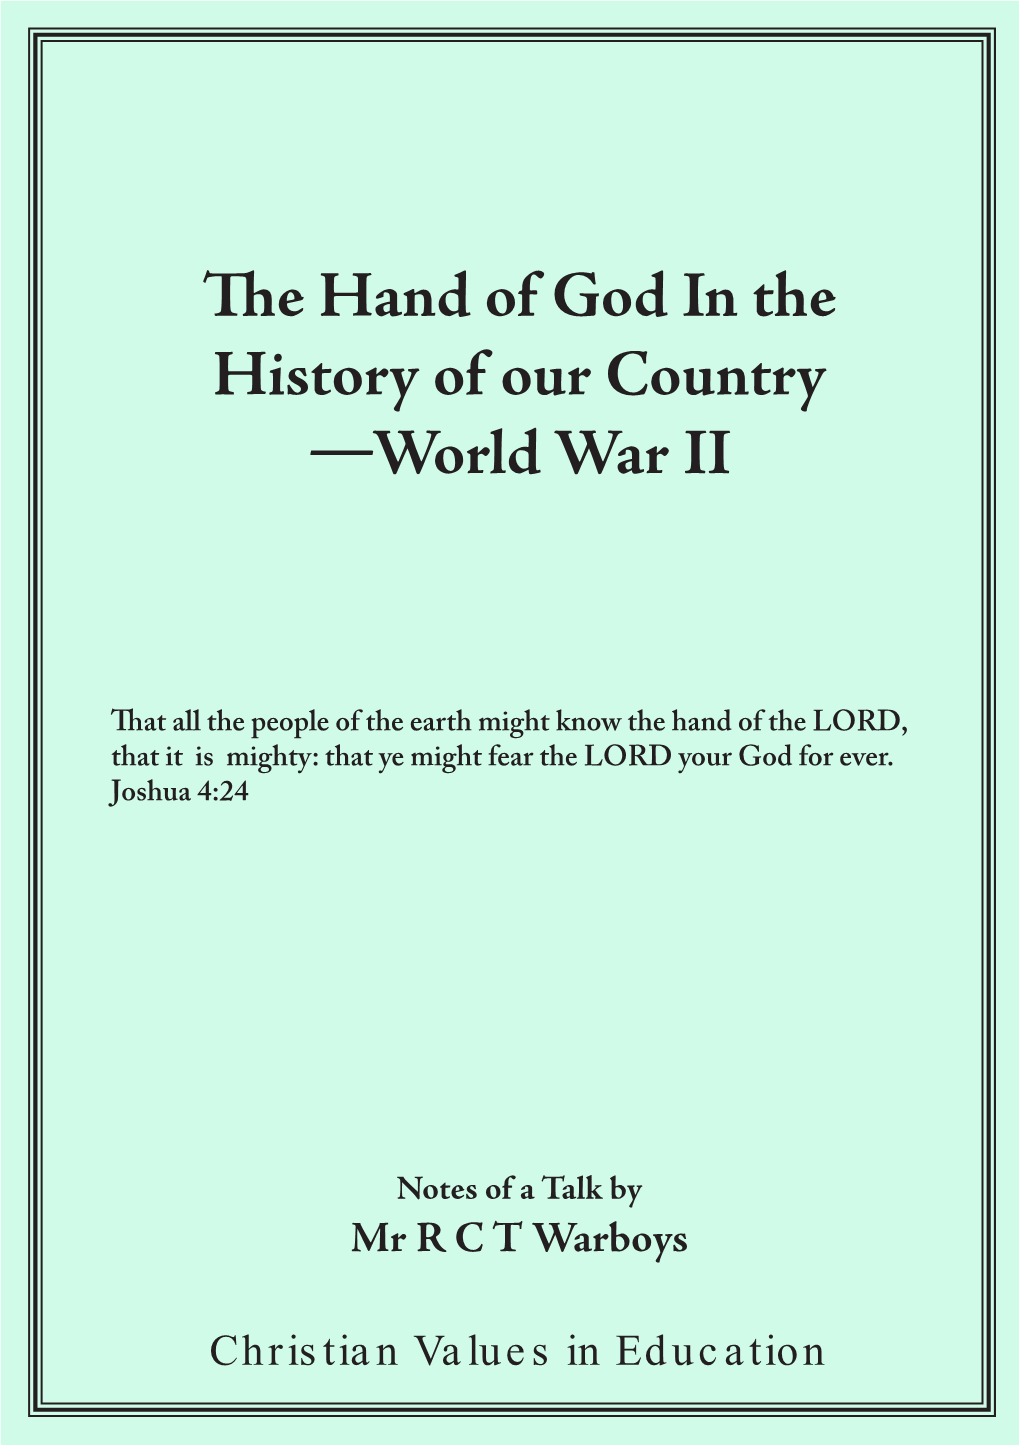 The Hand of God in Word War II